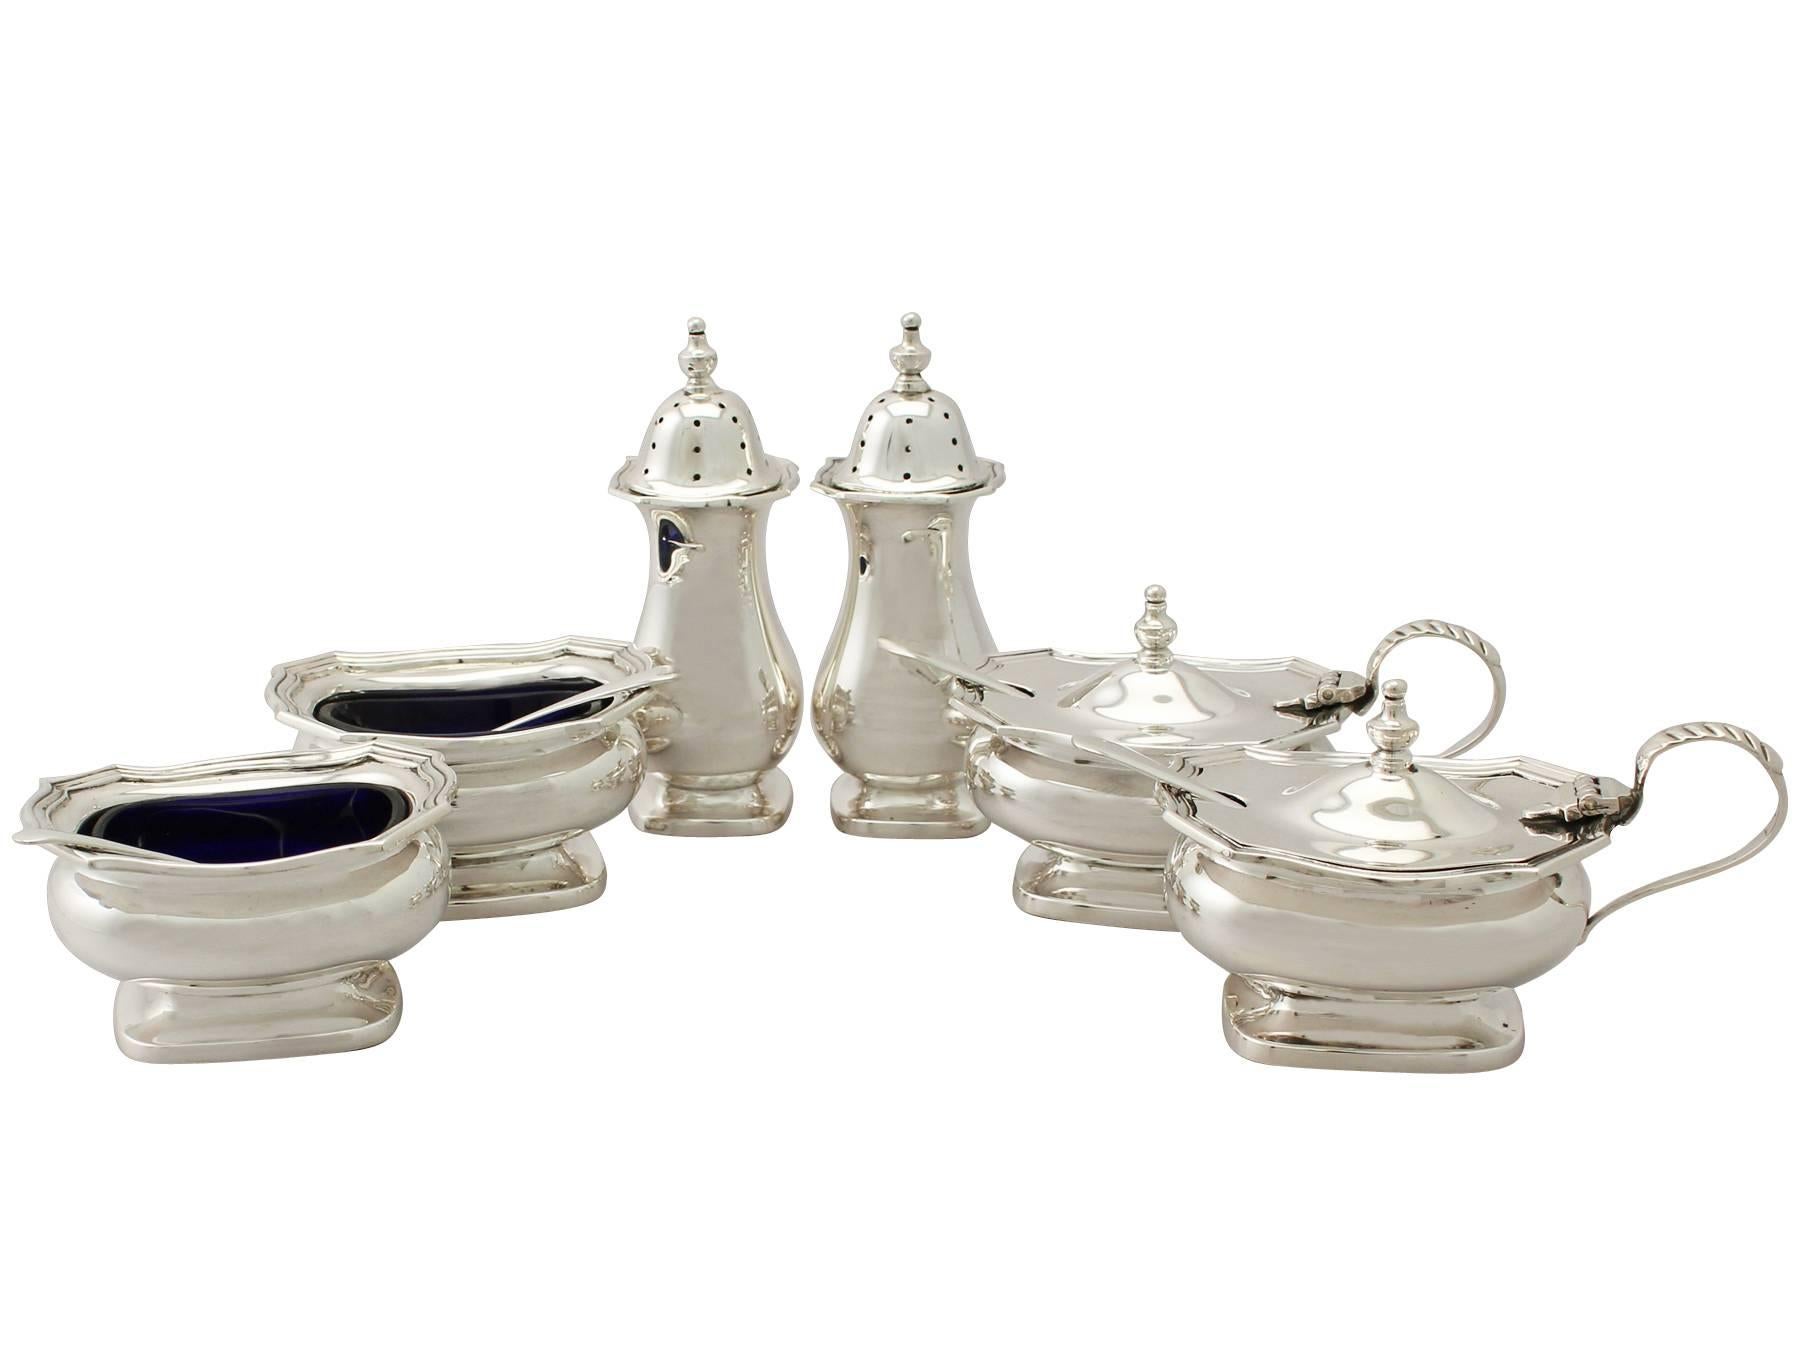 An exceptional, fine and impressive vintage Elizabeth II English sterling silver six piece condiment set - boxed; an addition to our dining silverware collection.

This exceptional vintage Elizabeth II sterling silver six piece condiment set